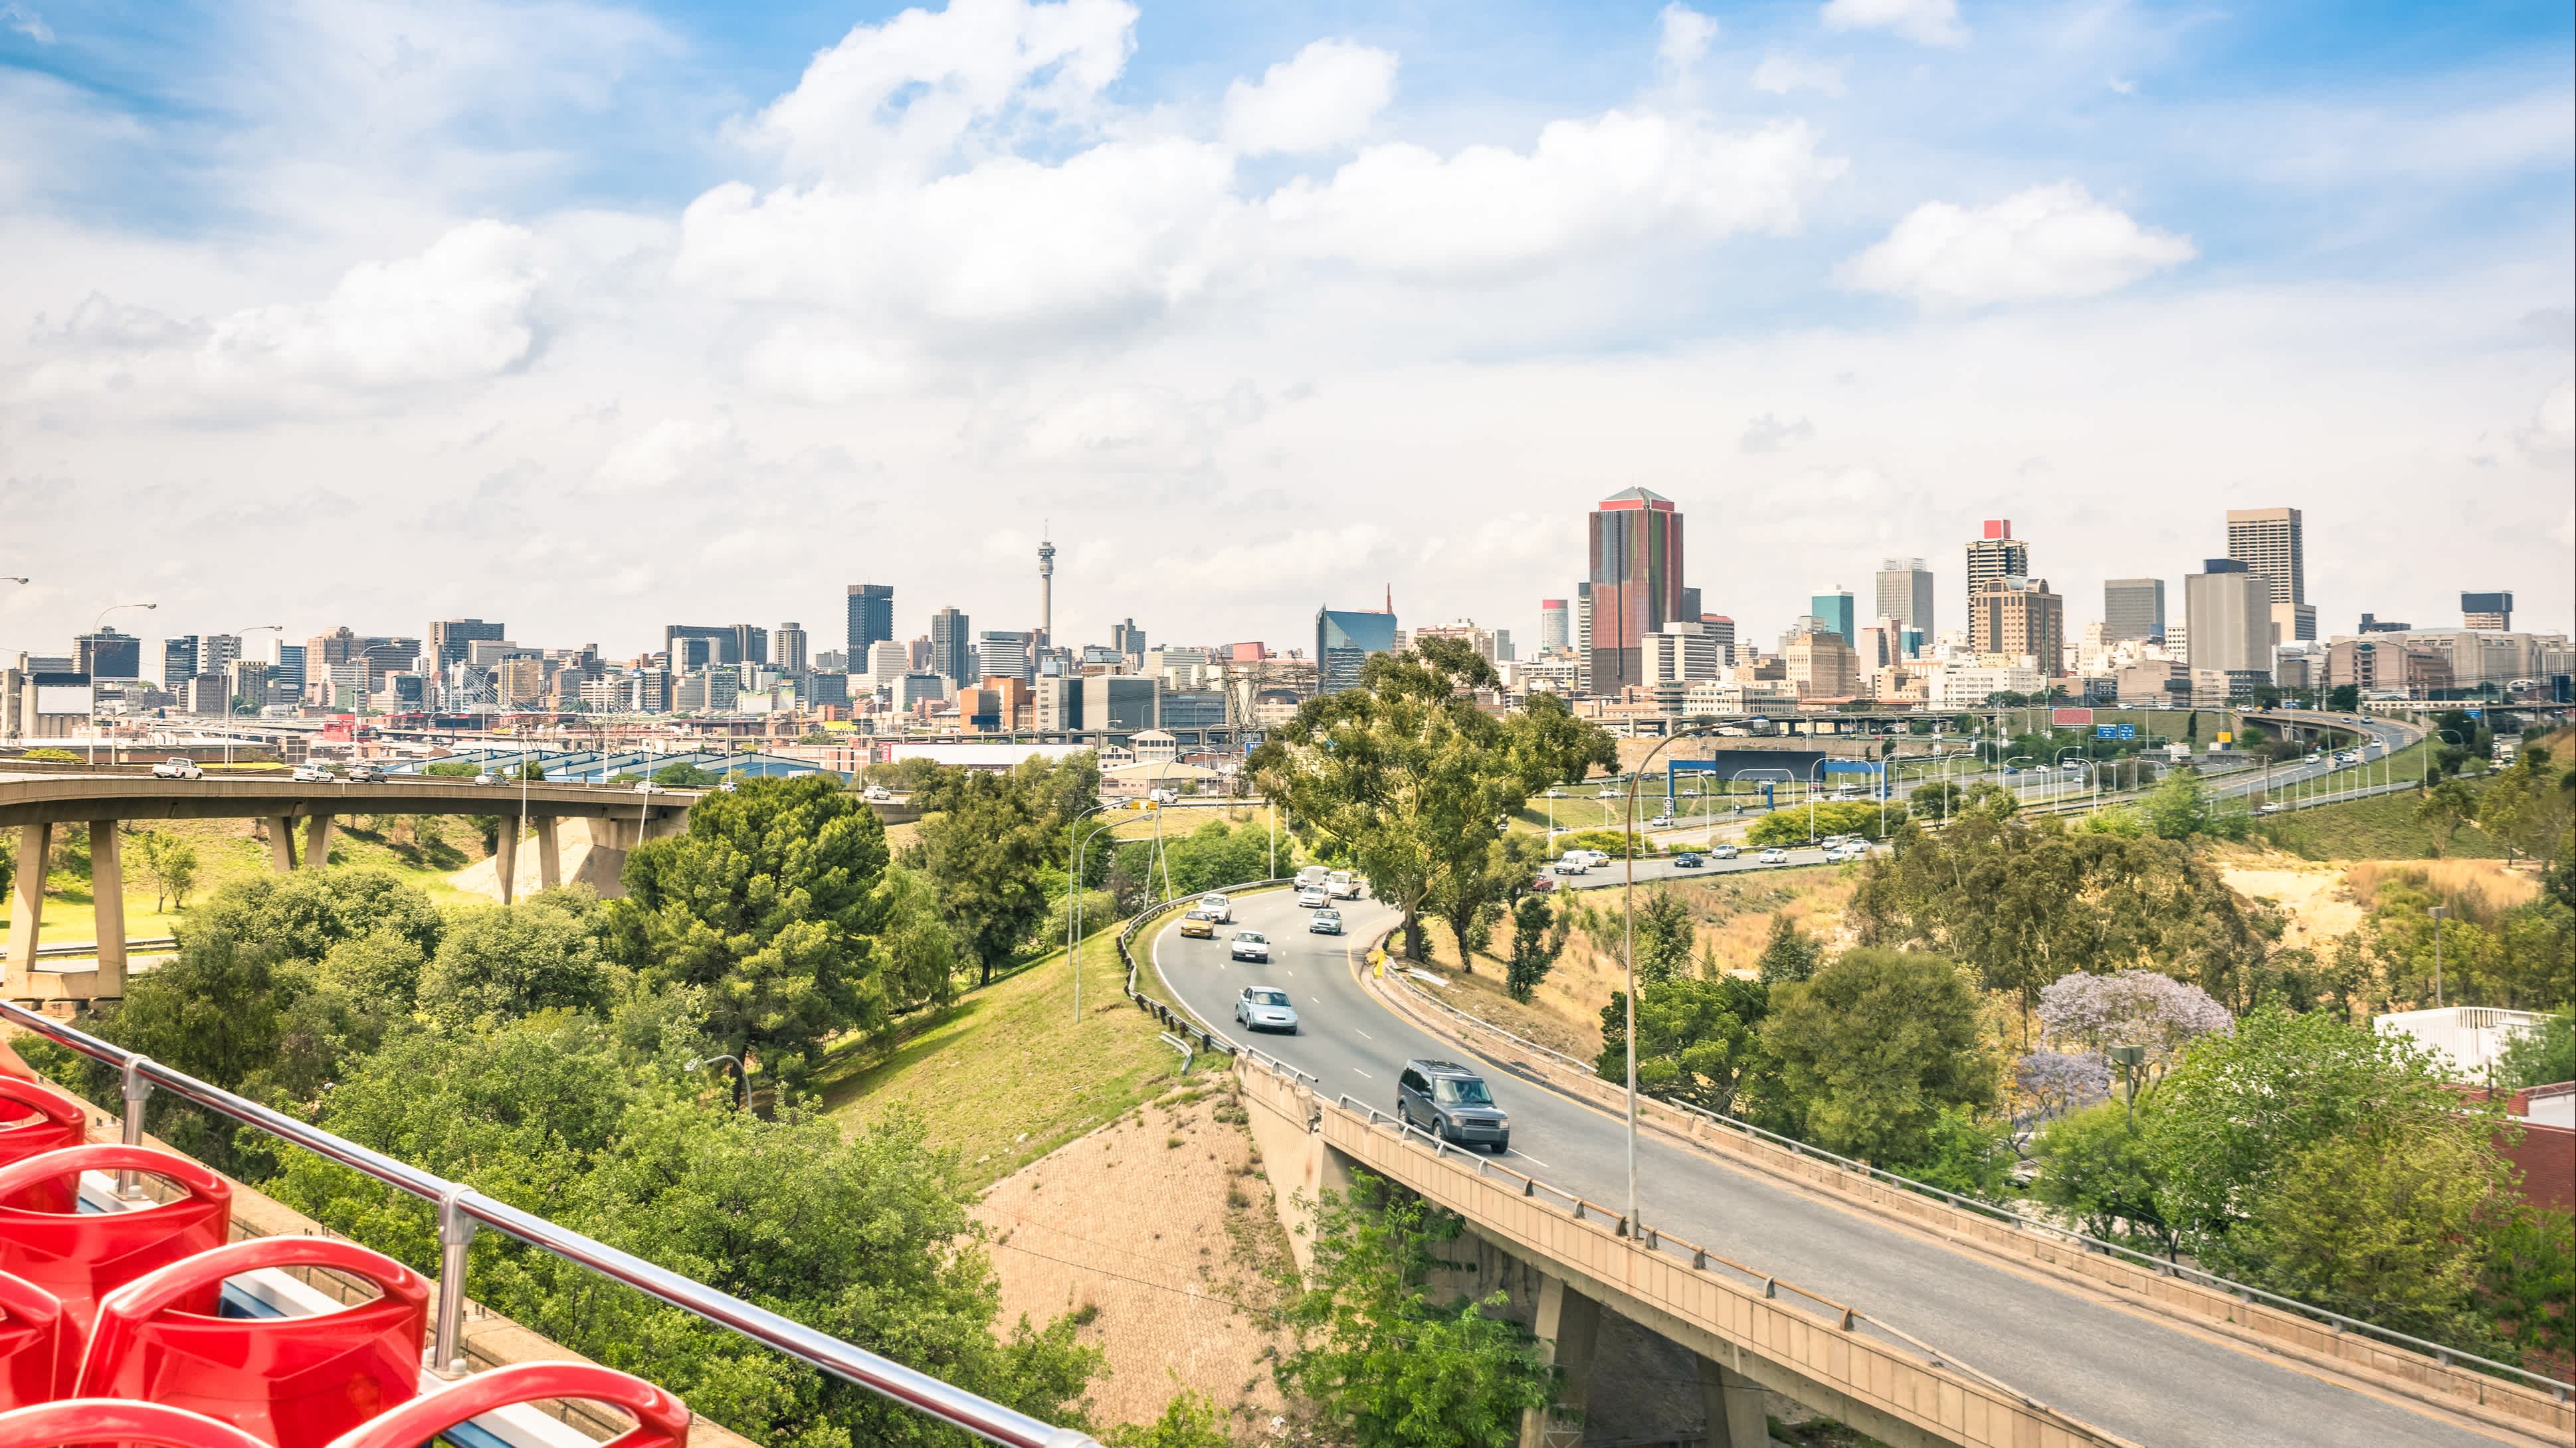 Africa, South Africa, freeway leading to the Johannesburg skyline